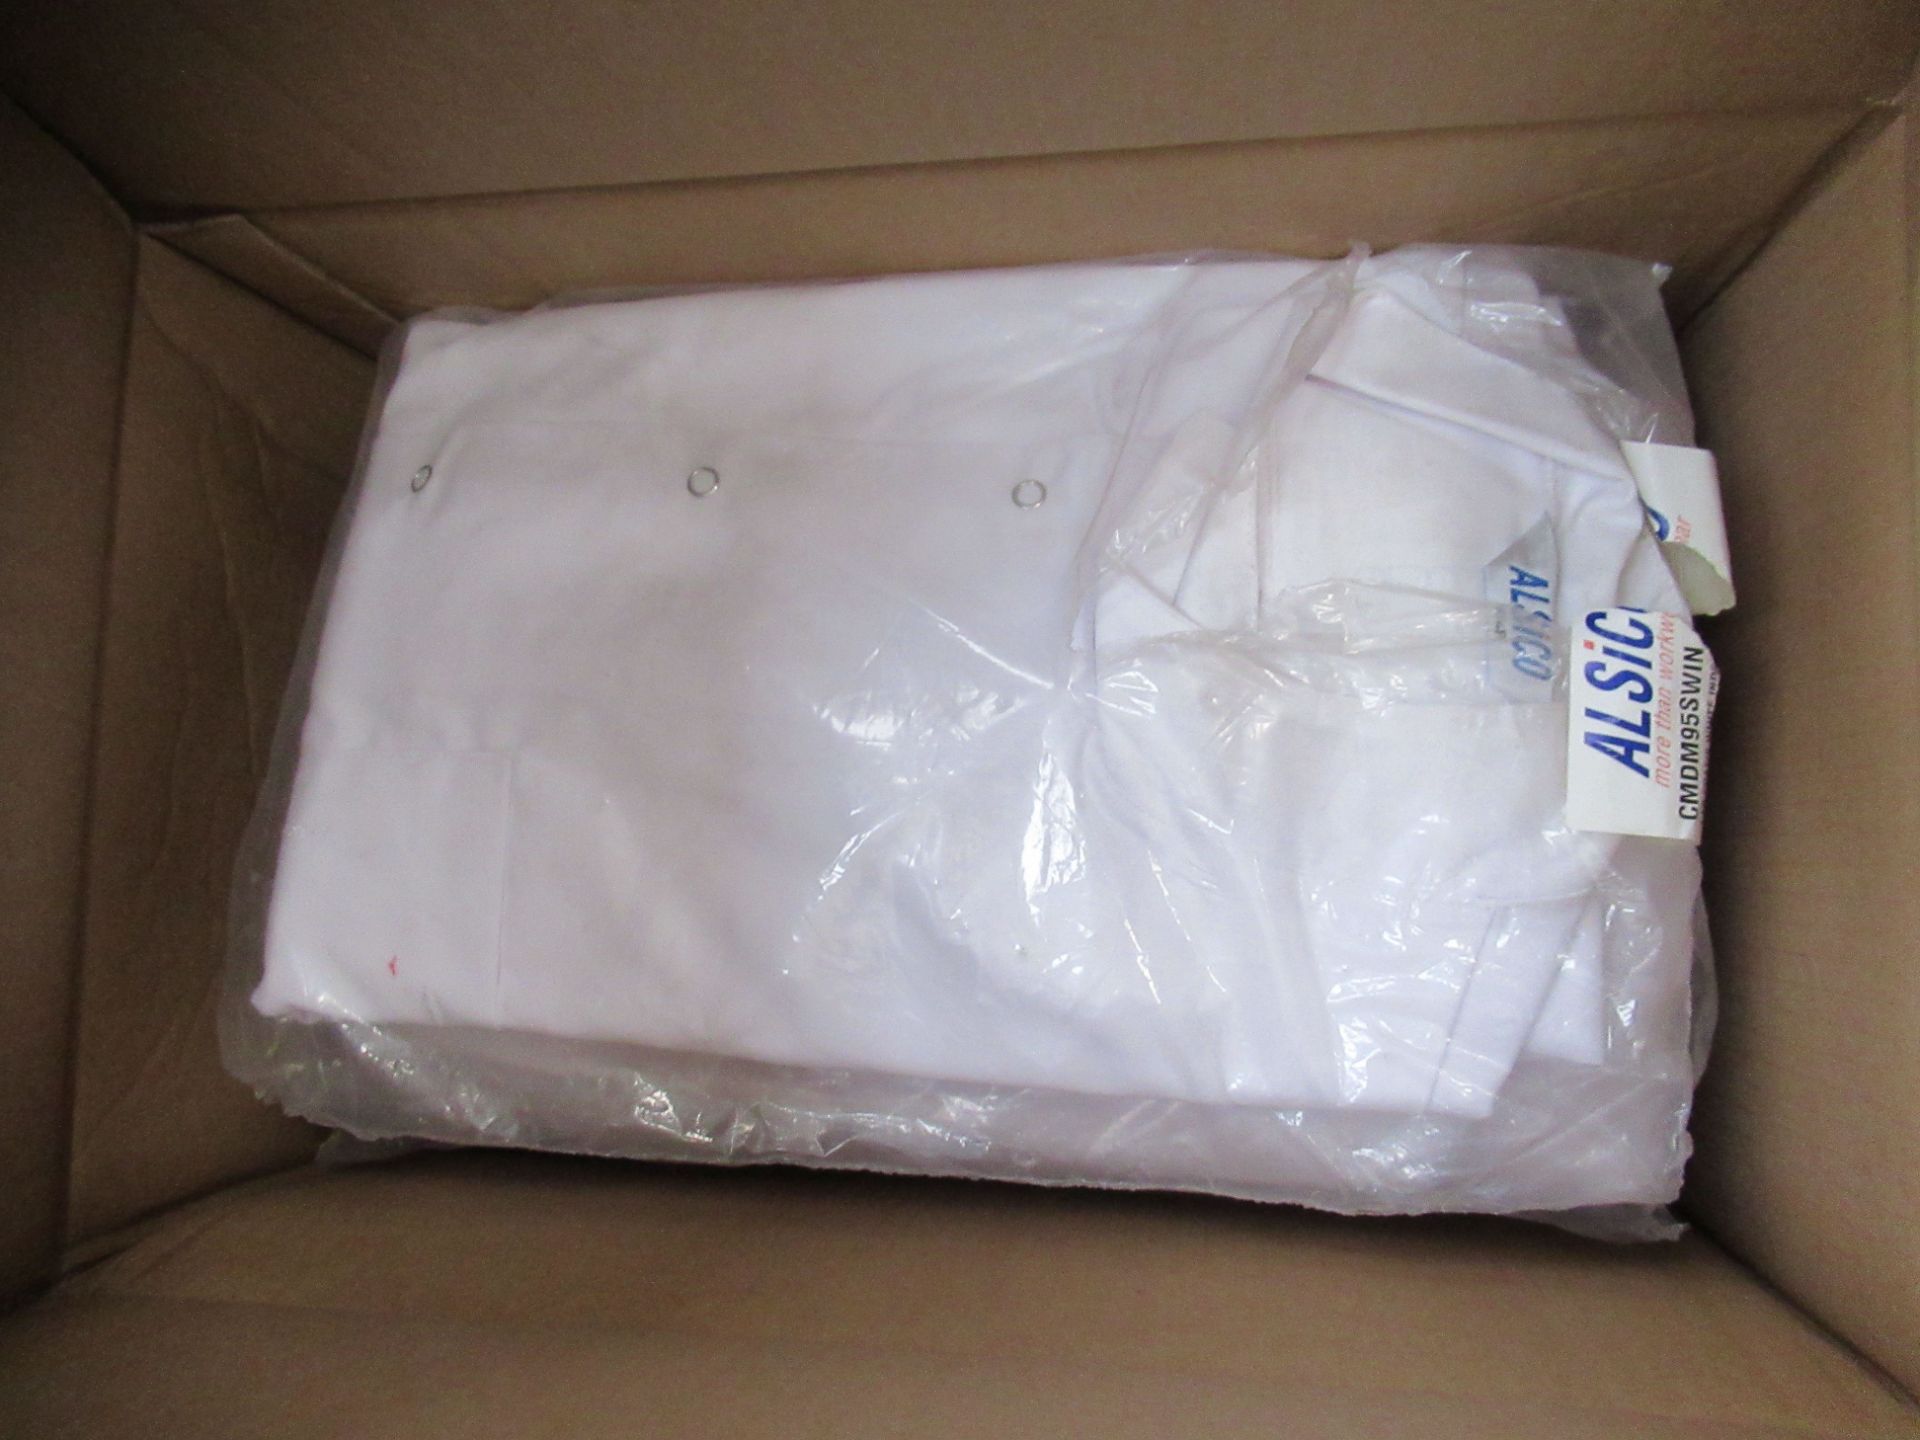 15x Reels of White Calendar Tape, 9x White Coats in size 104, Approx. 4000x Shirts Card Collars and - Image 4 of 10